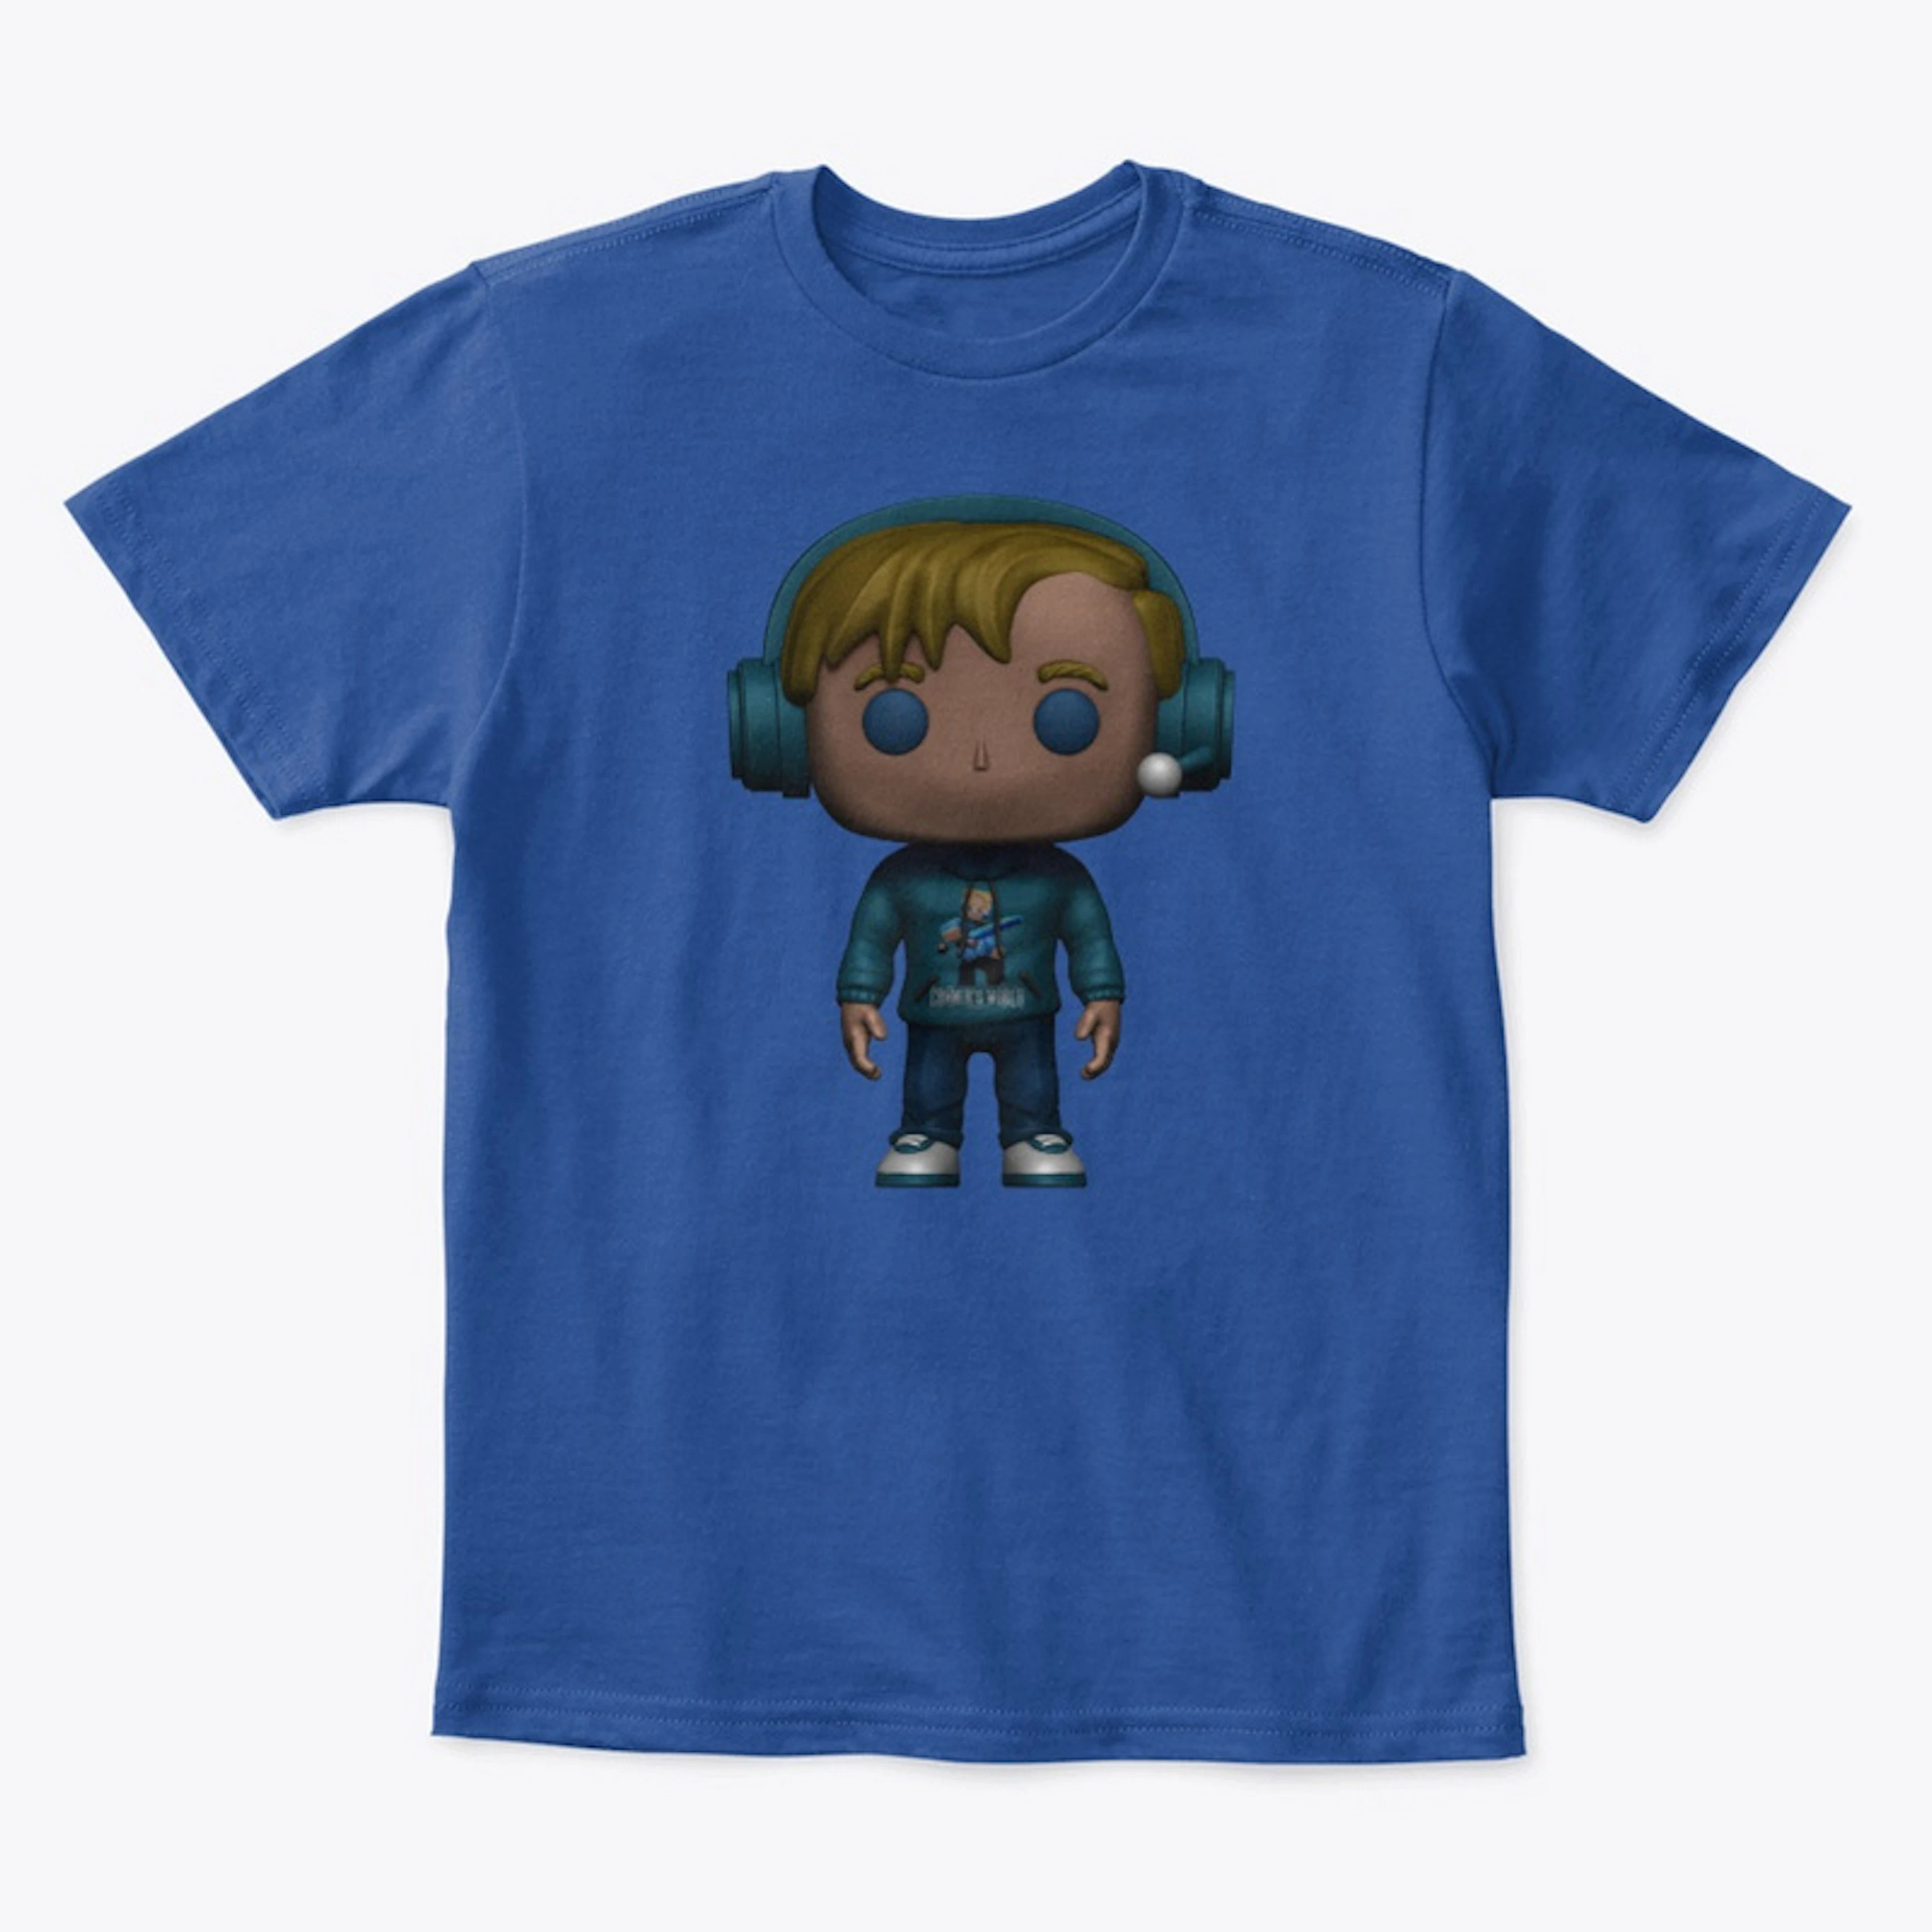 Official Conner's World Trainer Kids Tee